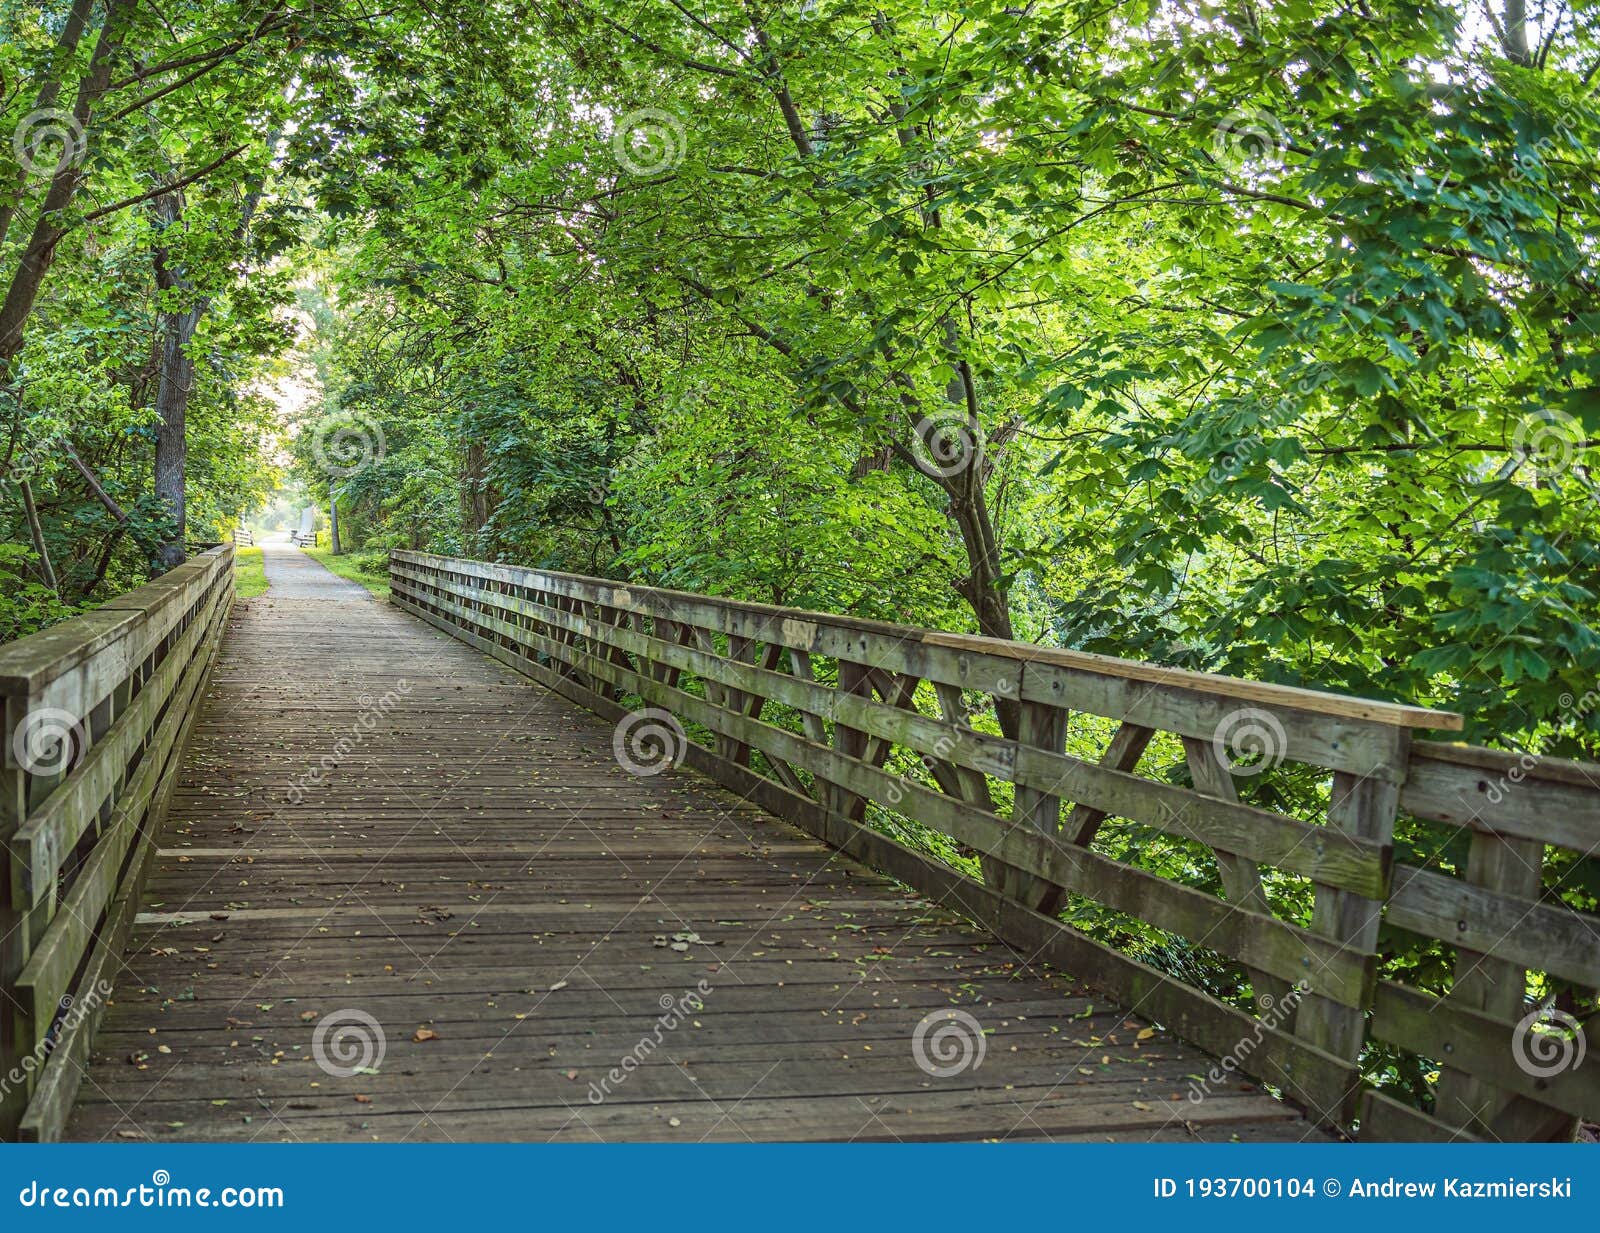 https://thumbs.dreamstime.com/z/trail-bridge-old-wooden-along-henry-hudson-monmouth-county-new-jersey-193700104.jpg